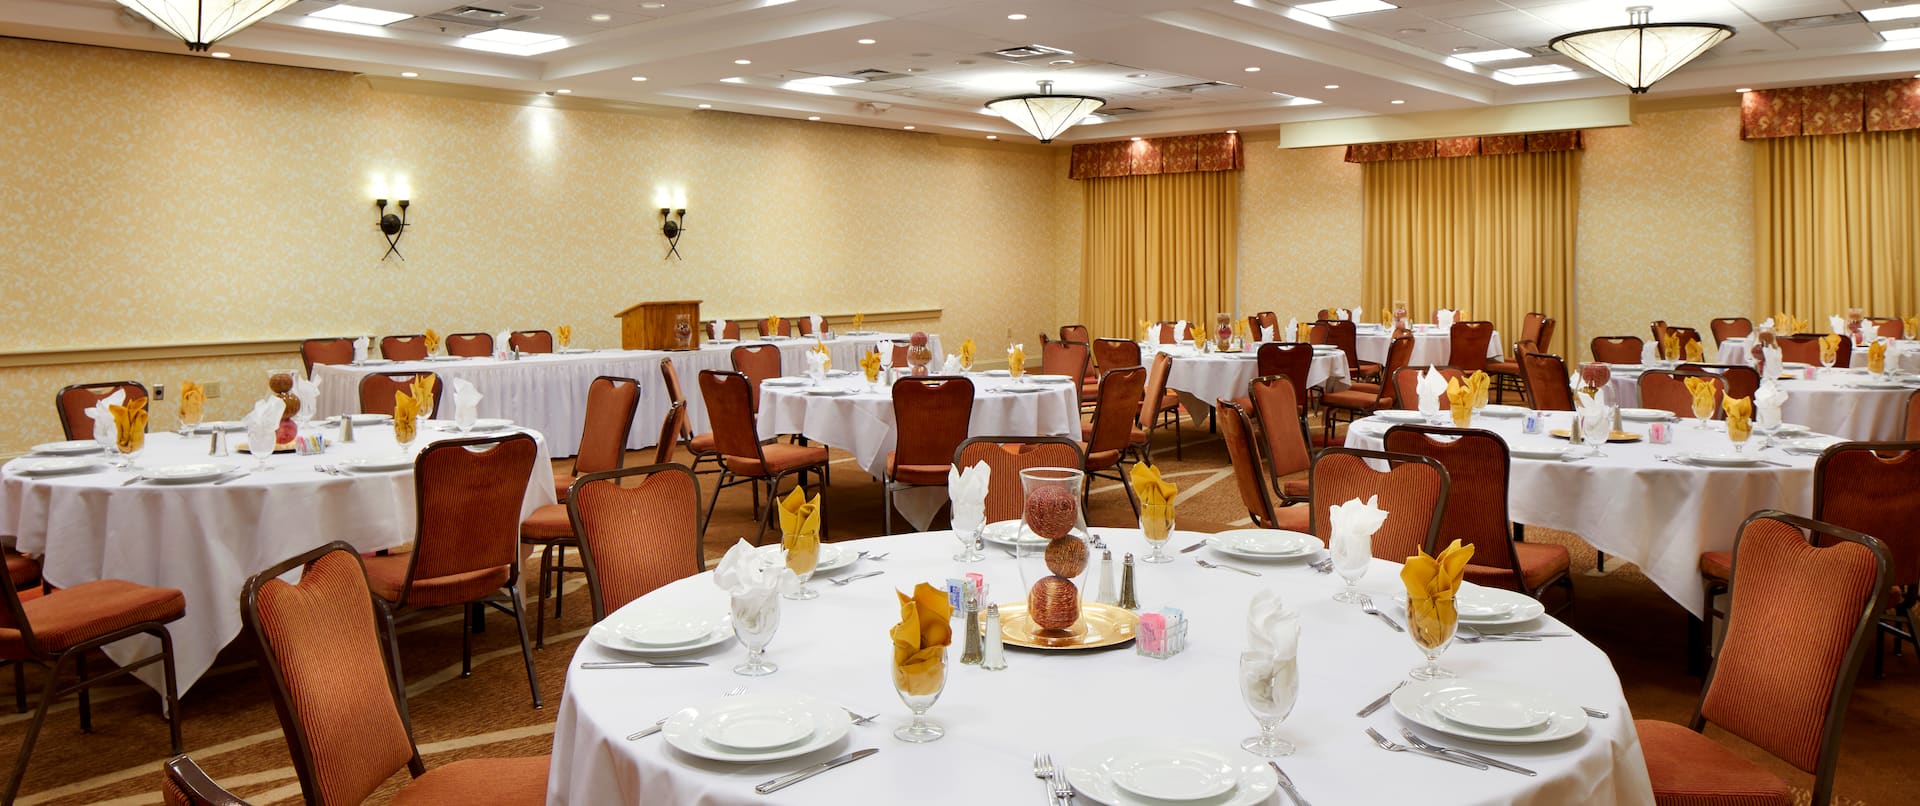 Chairs, Place Settings, Decorative Centerpieces, and White Linens on Round Tables in Ballroom Set Up for Banquet